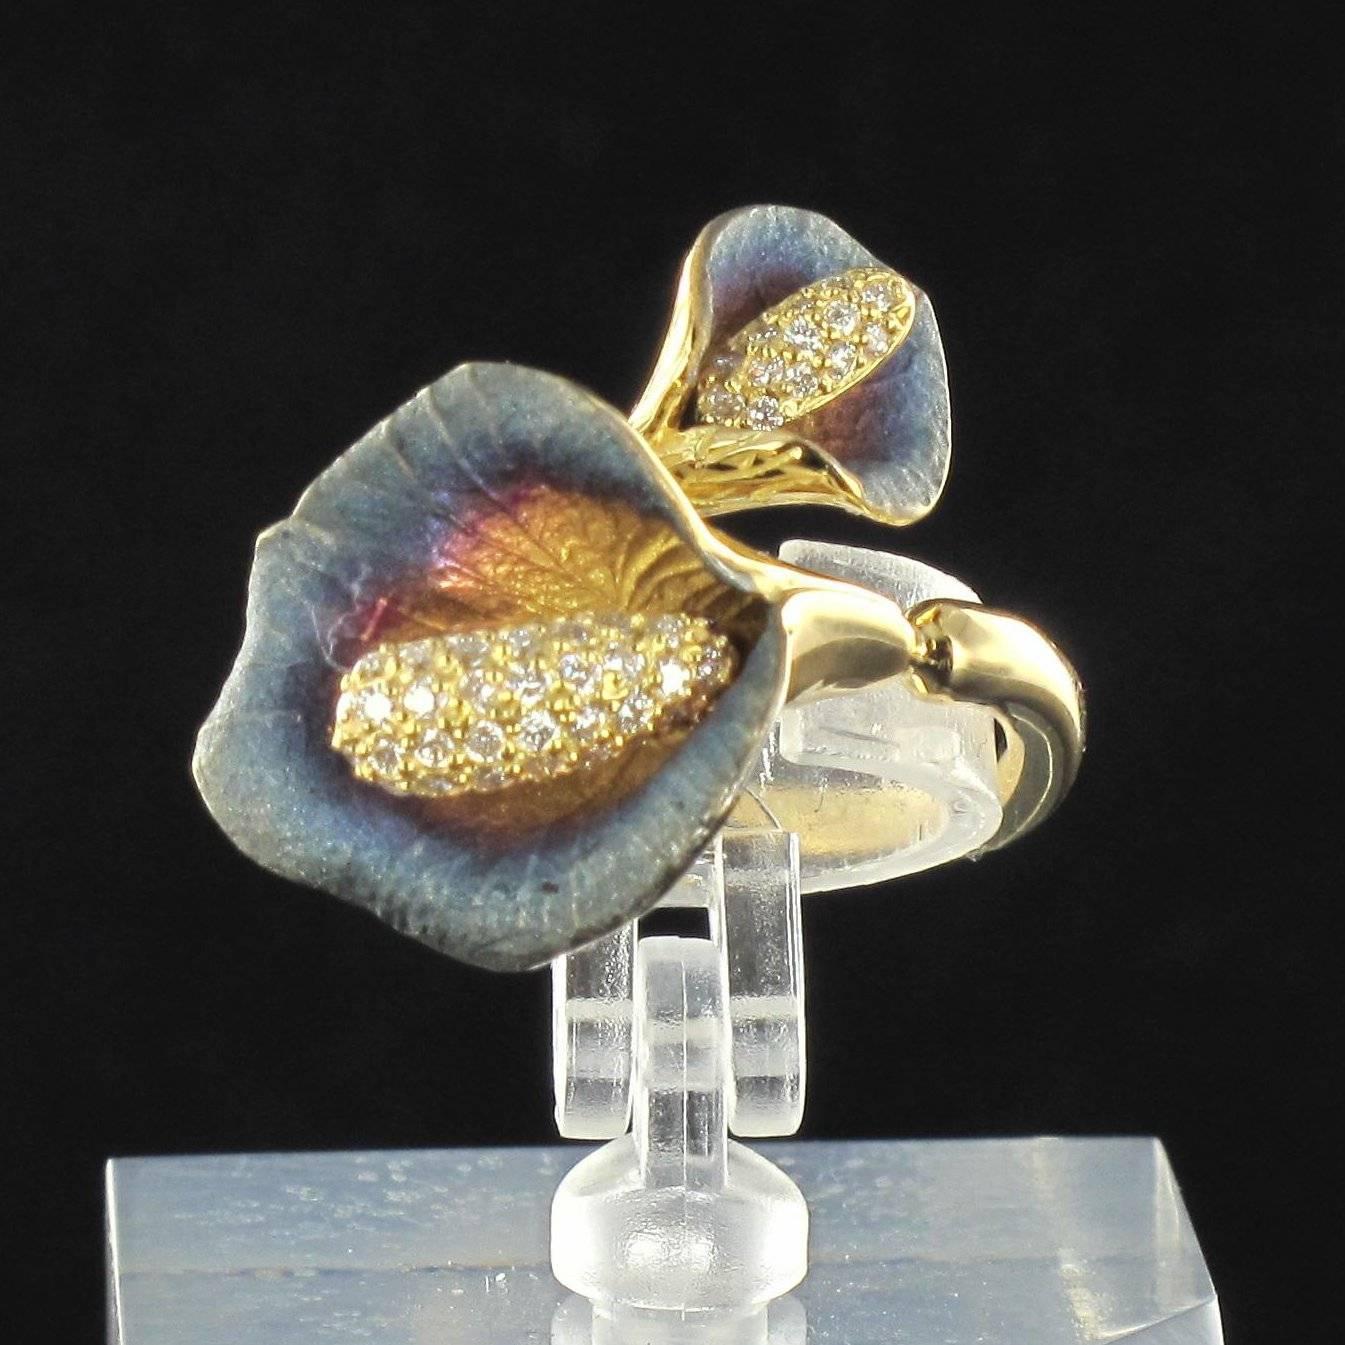 Ring in 18K Yellow gold.

Consisting of two arum lily flowers with pink enamel hearts fading to blue at the edges, the pistils are of diamonds. One lily is larger than the other; they meet at the top of the finger. 

Length: 5 cm, width: 2 cm